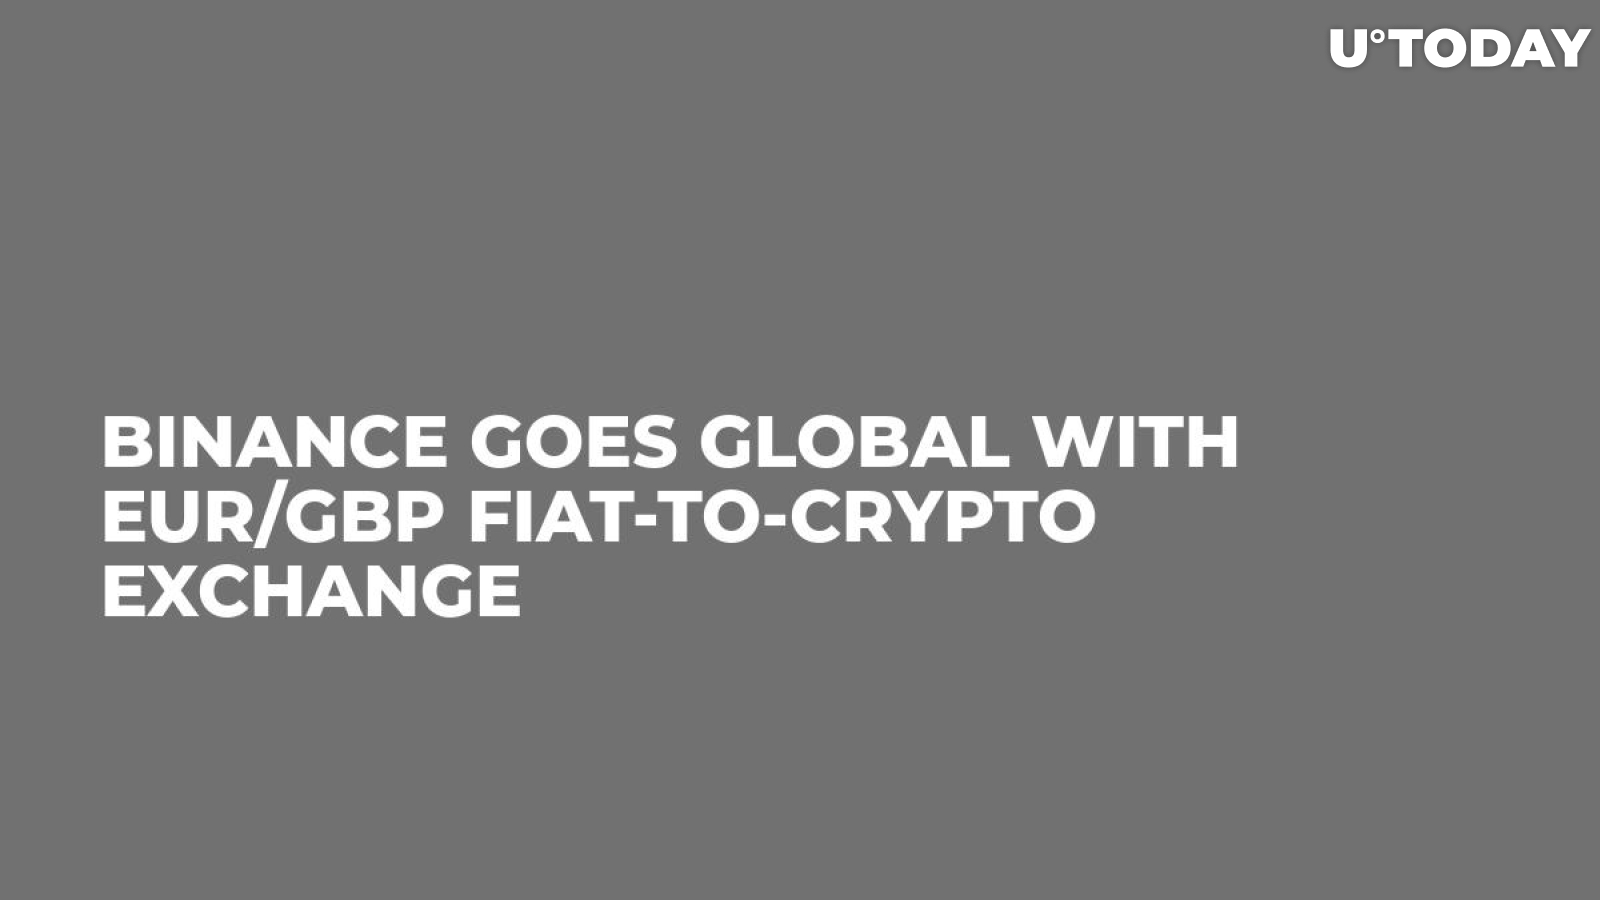 Binance Goes Global with EUR/GBP Fiat-to-Crypto Exchange